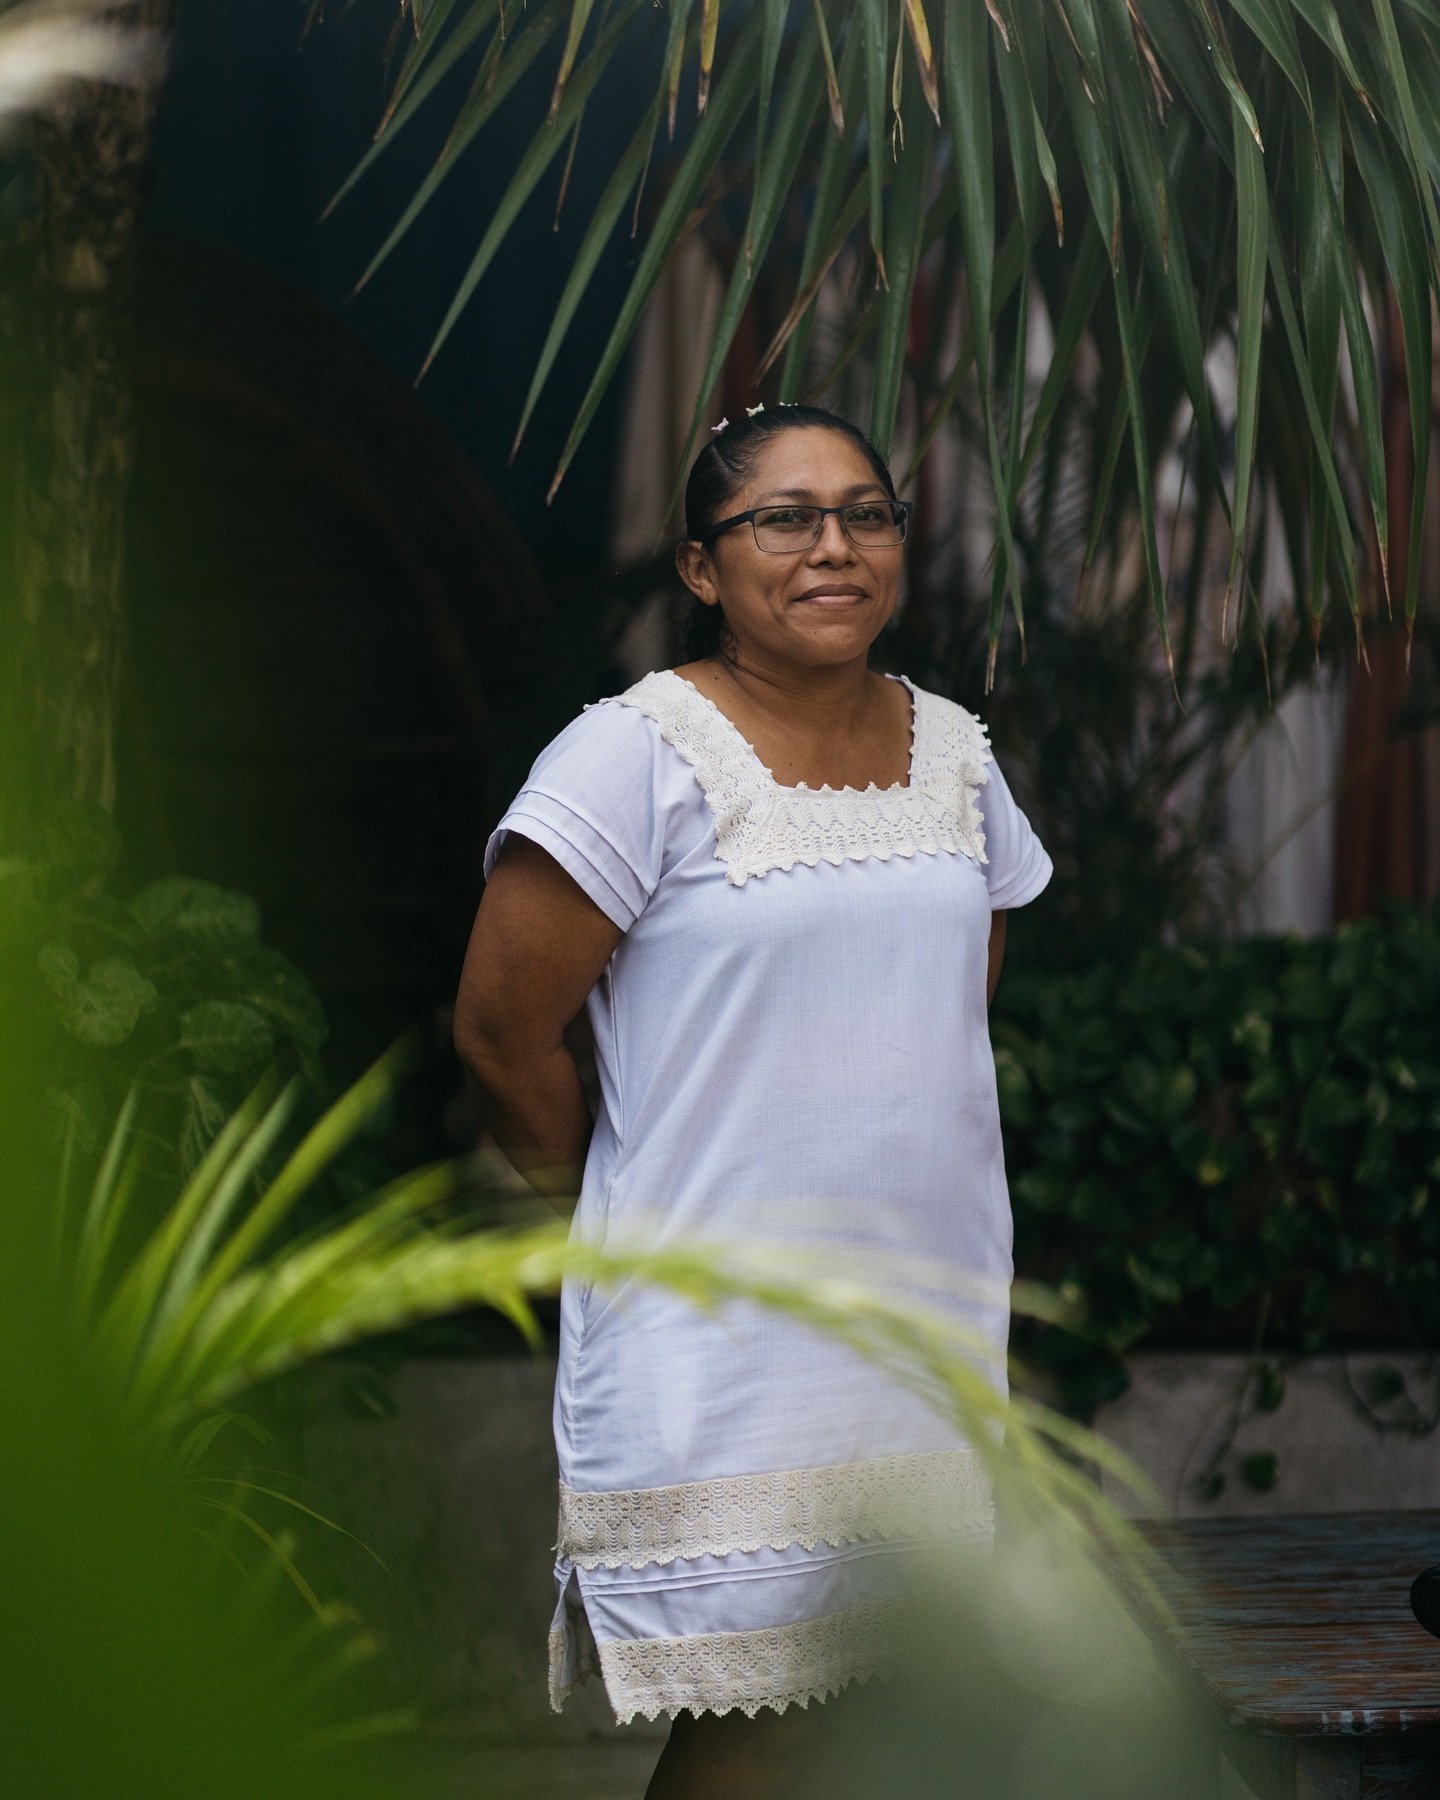 She&rsquo;s Vero 🙋🏽&zwj;♀️, our housekeeper extraordinaire! Trustworthy and with an incredible memory 🙌🏼
She oversees the housekeeping department, public areas, and laundry! Thanks to her dedication and her team&rsquo;s collaboration, our hotel p